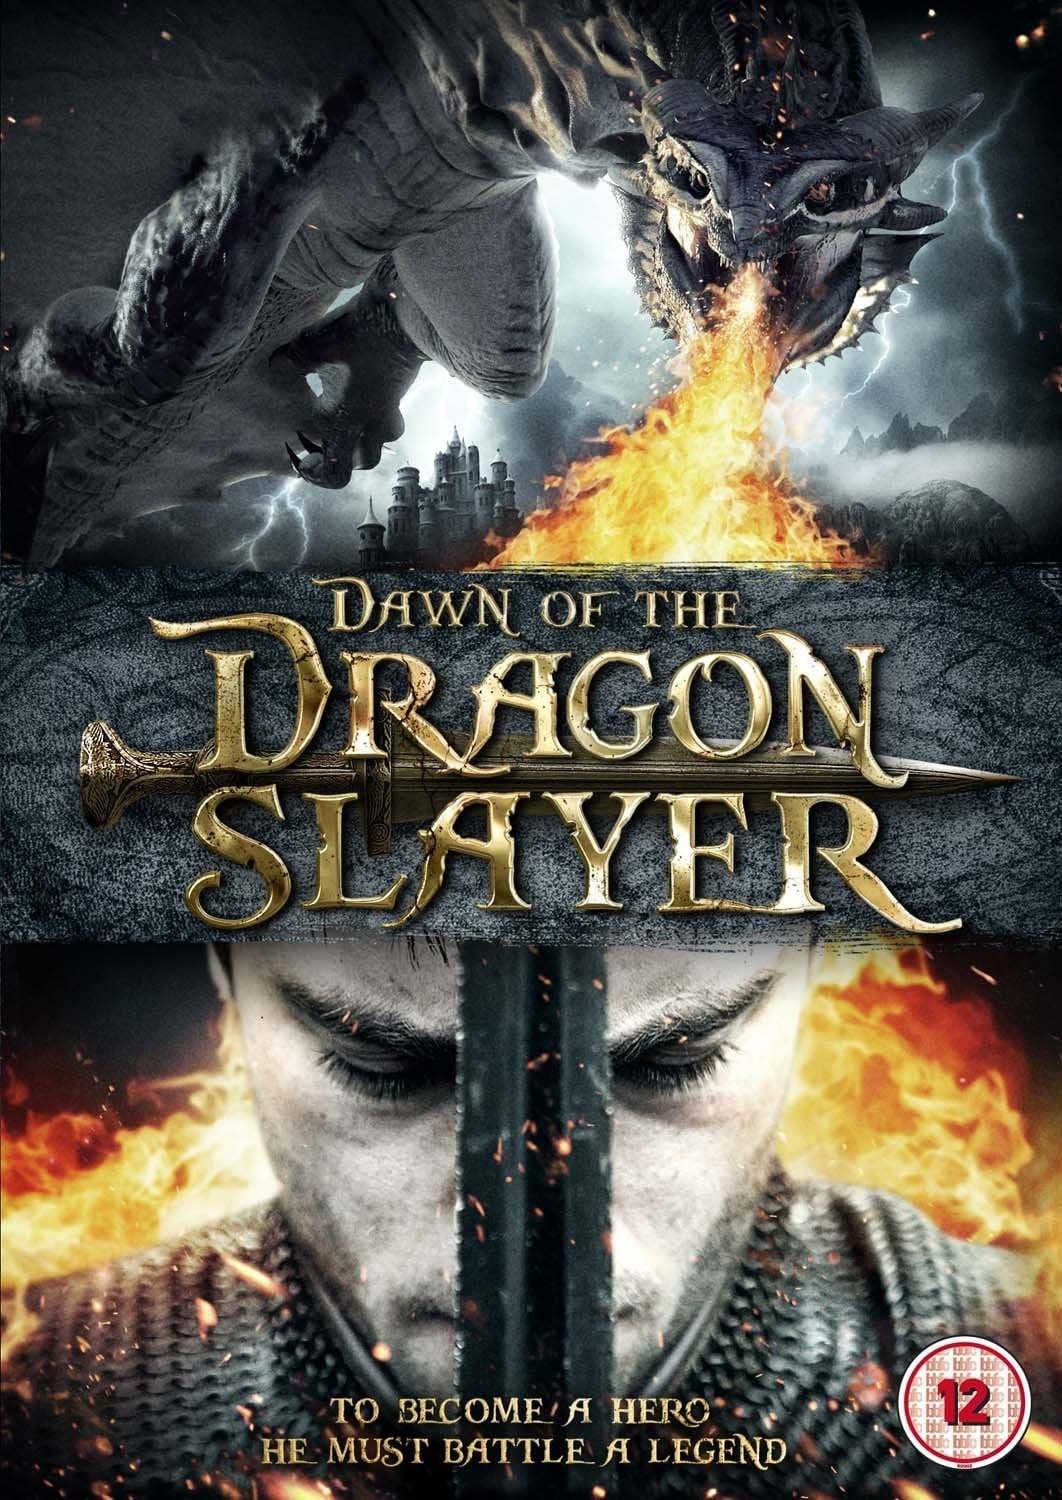 Dawn of the Dragonslayer poster